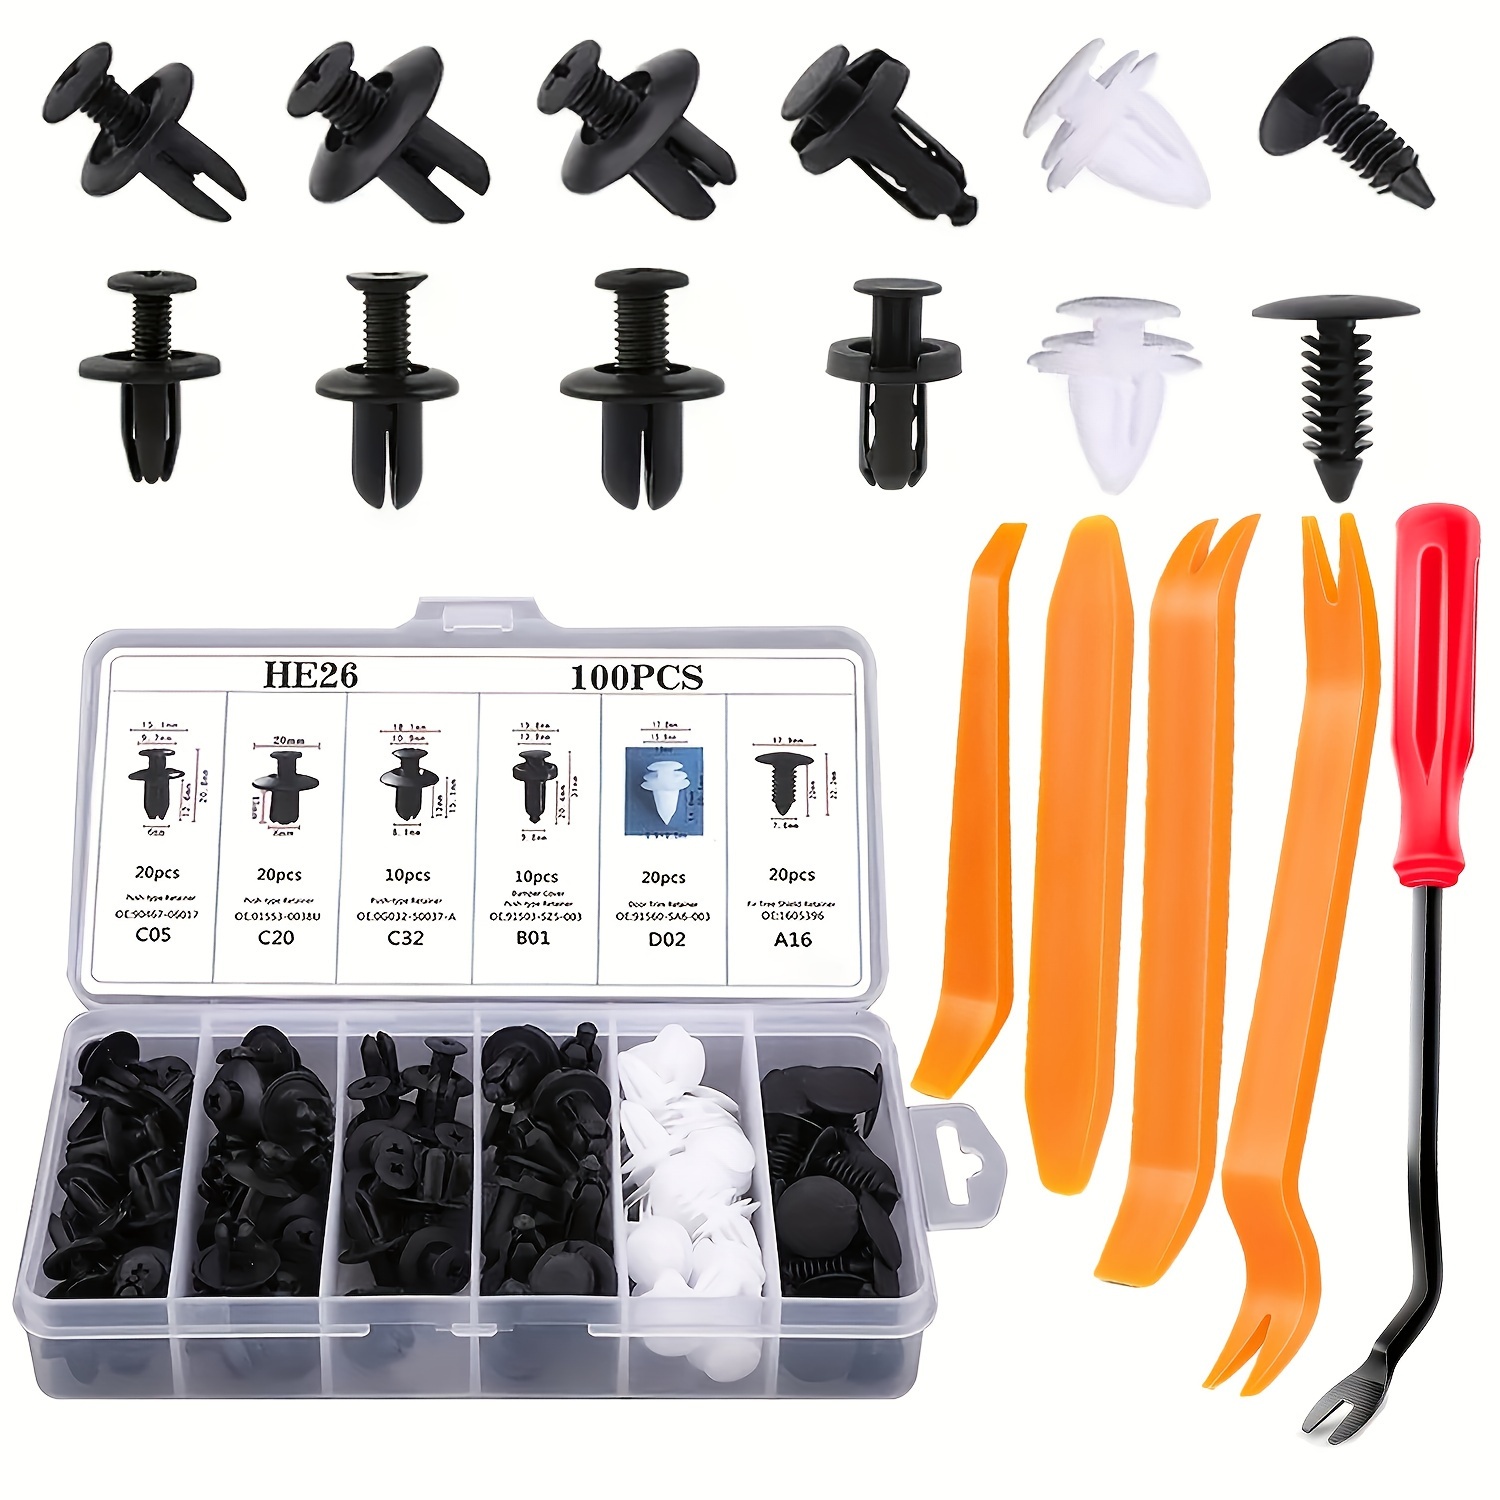 

105pcs Boxed Snaps With Tool, Universal Snaps Set For Car, Nylon Bumper Snaps, Fixing Clips Kit With Removal Fastener Tool, Door Panel Clips